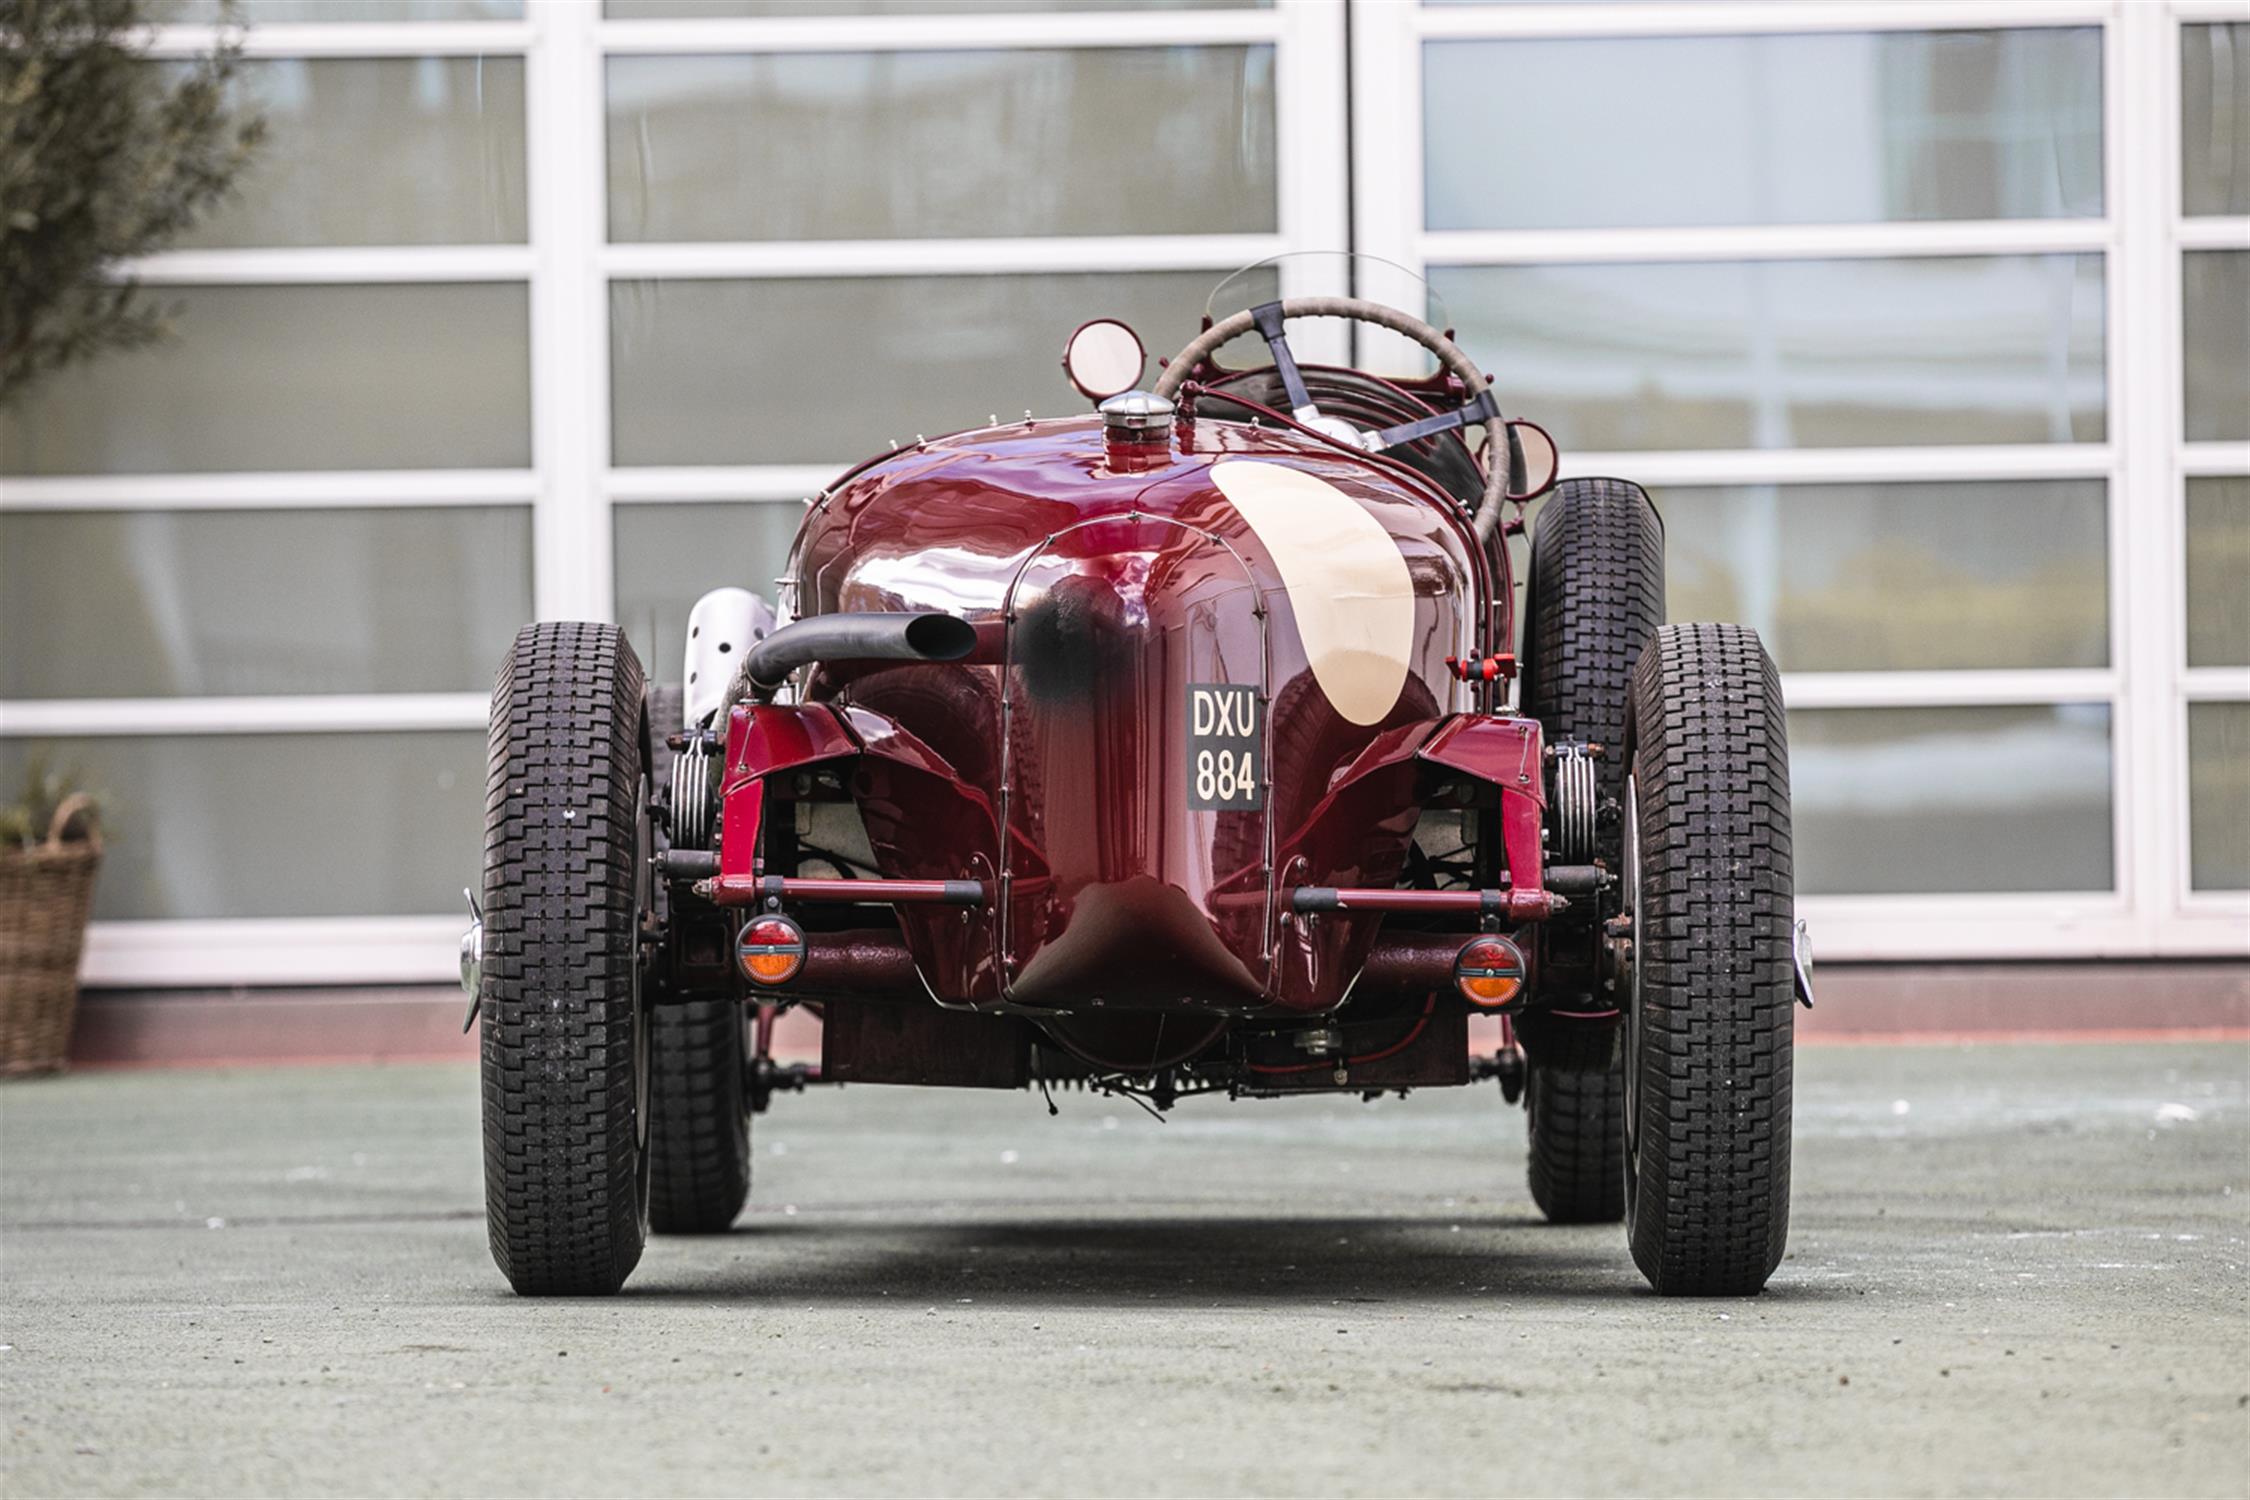 1937 Riley Monza Special 2.5 Litre (FIVA) - The Dart - Image 5 of 10